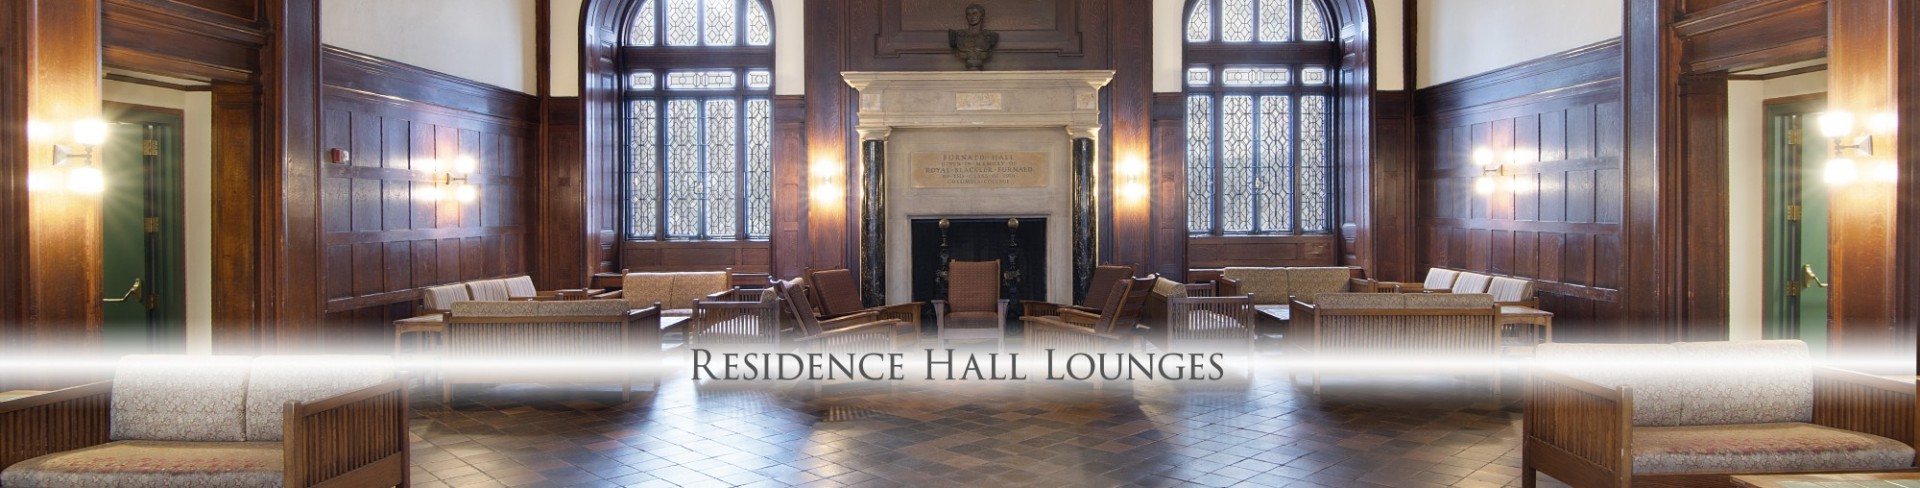 Residence Hall Lounges